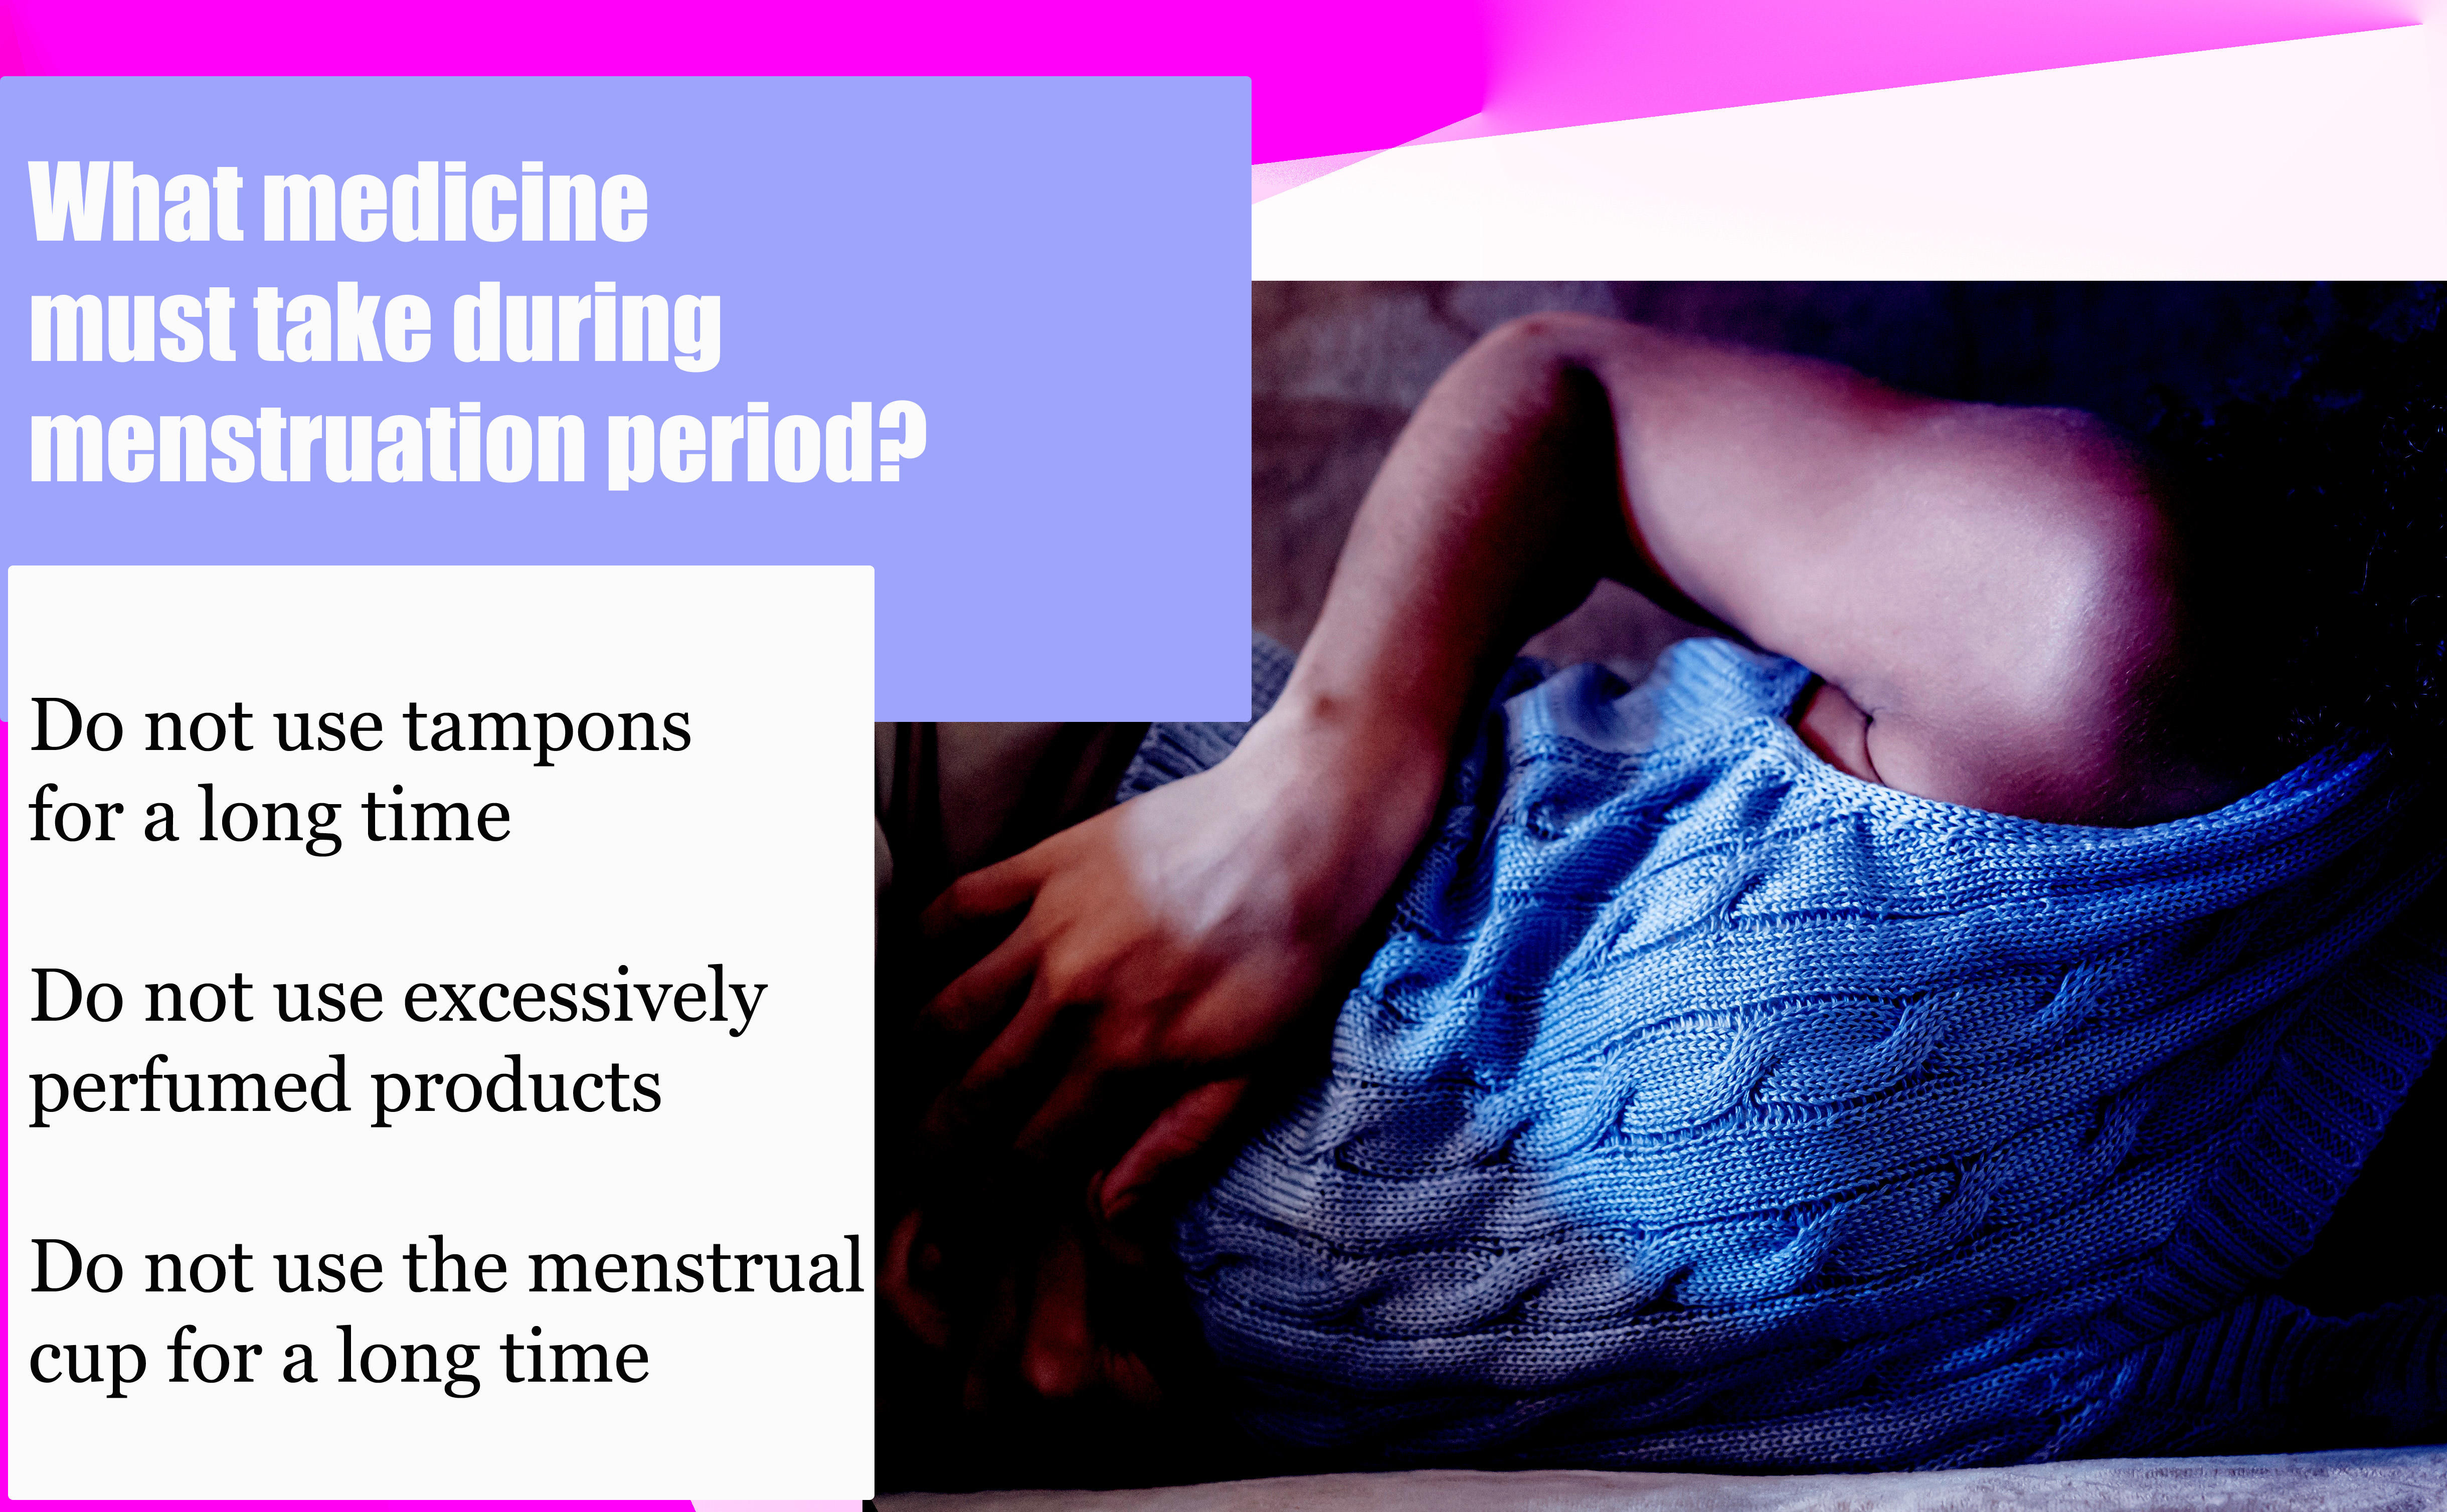 What medicine must take during menstruation period?